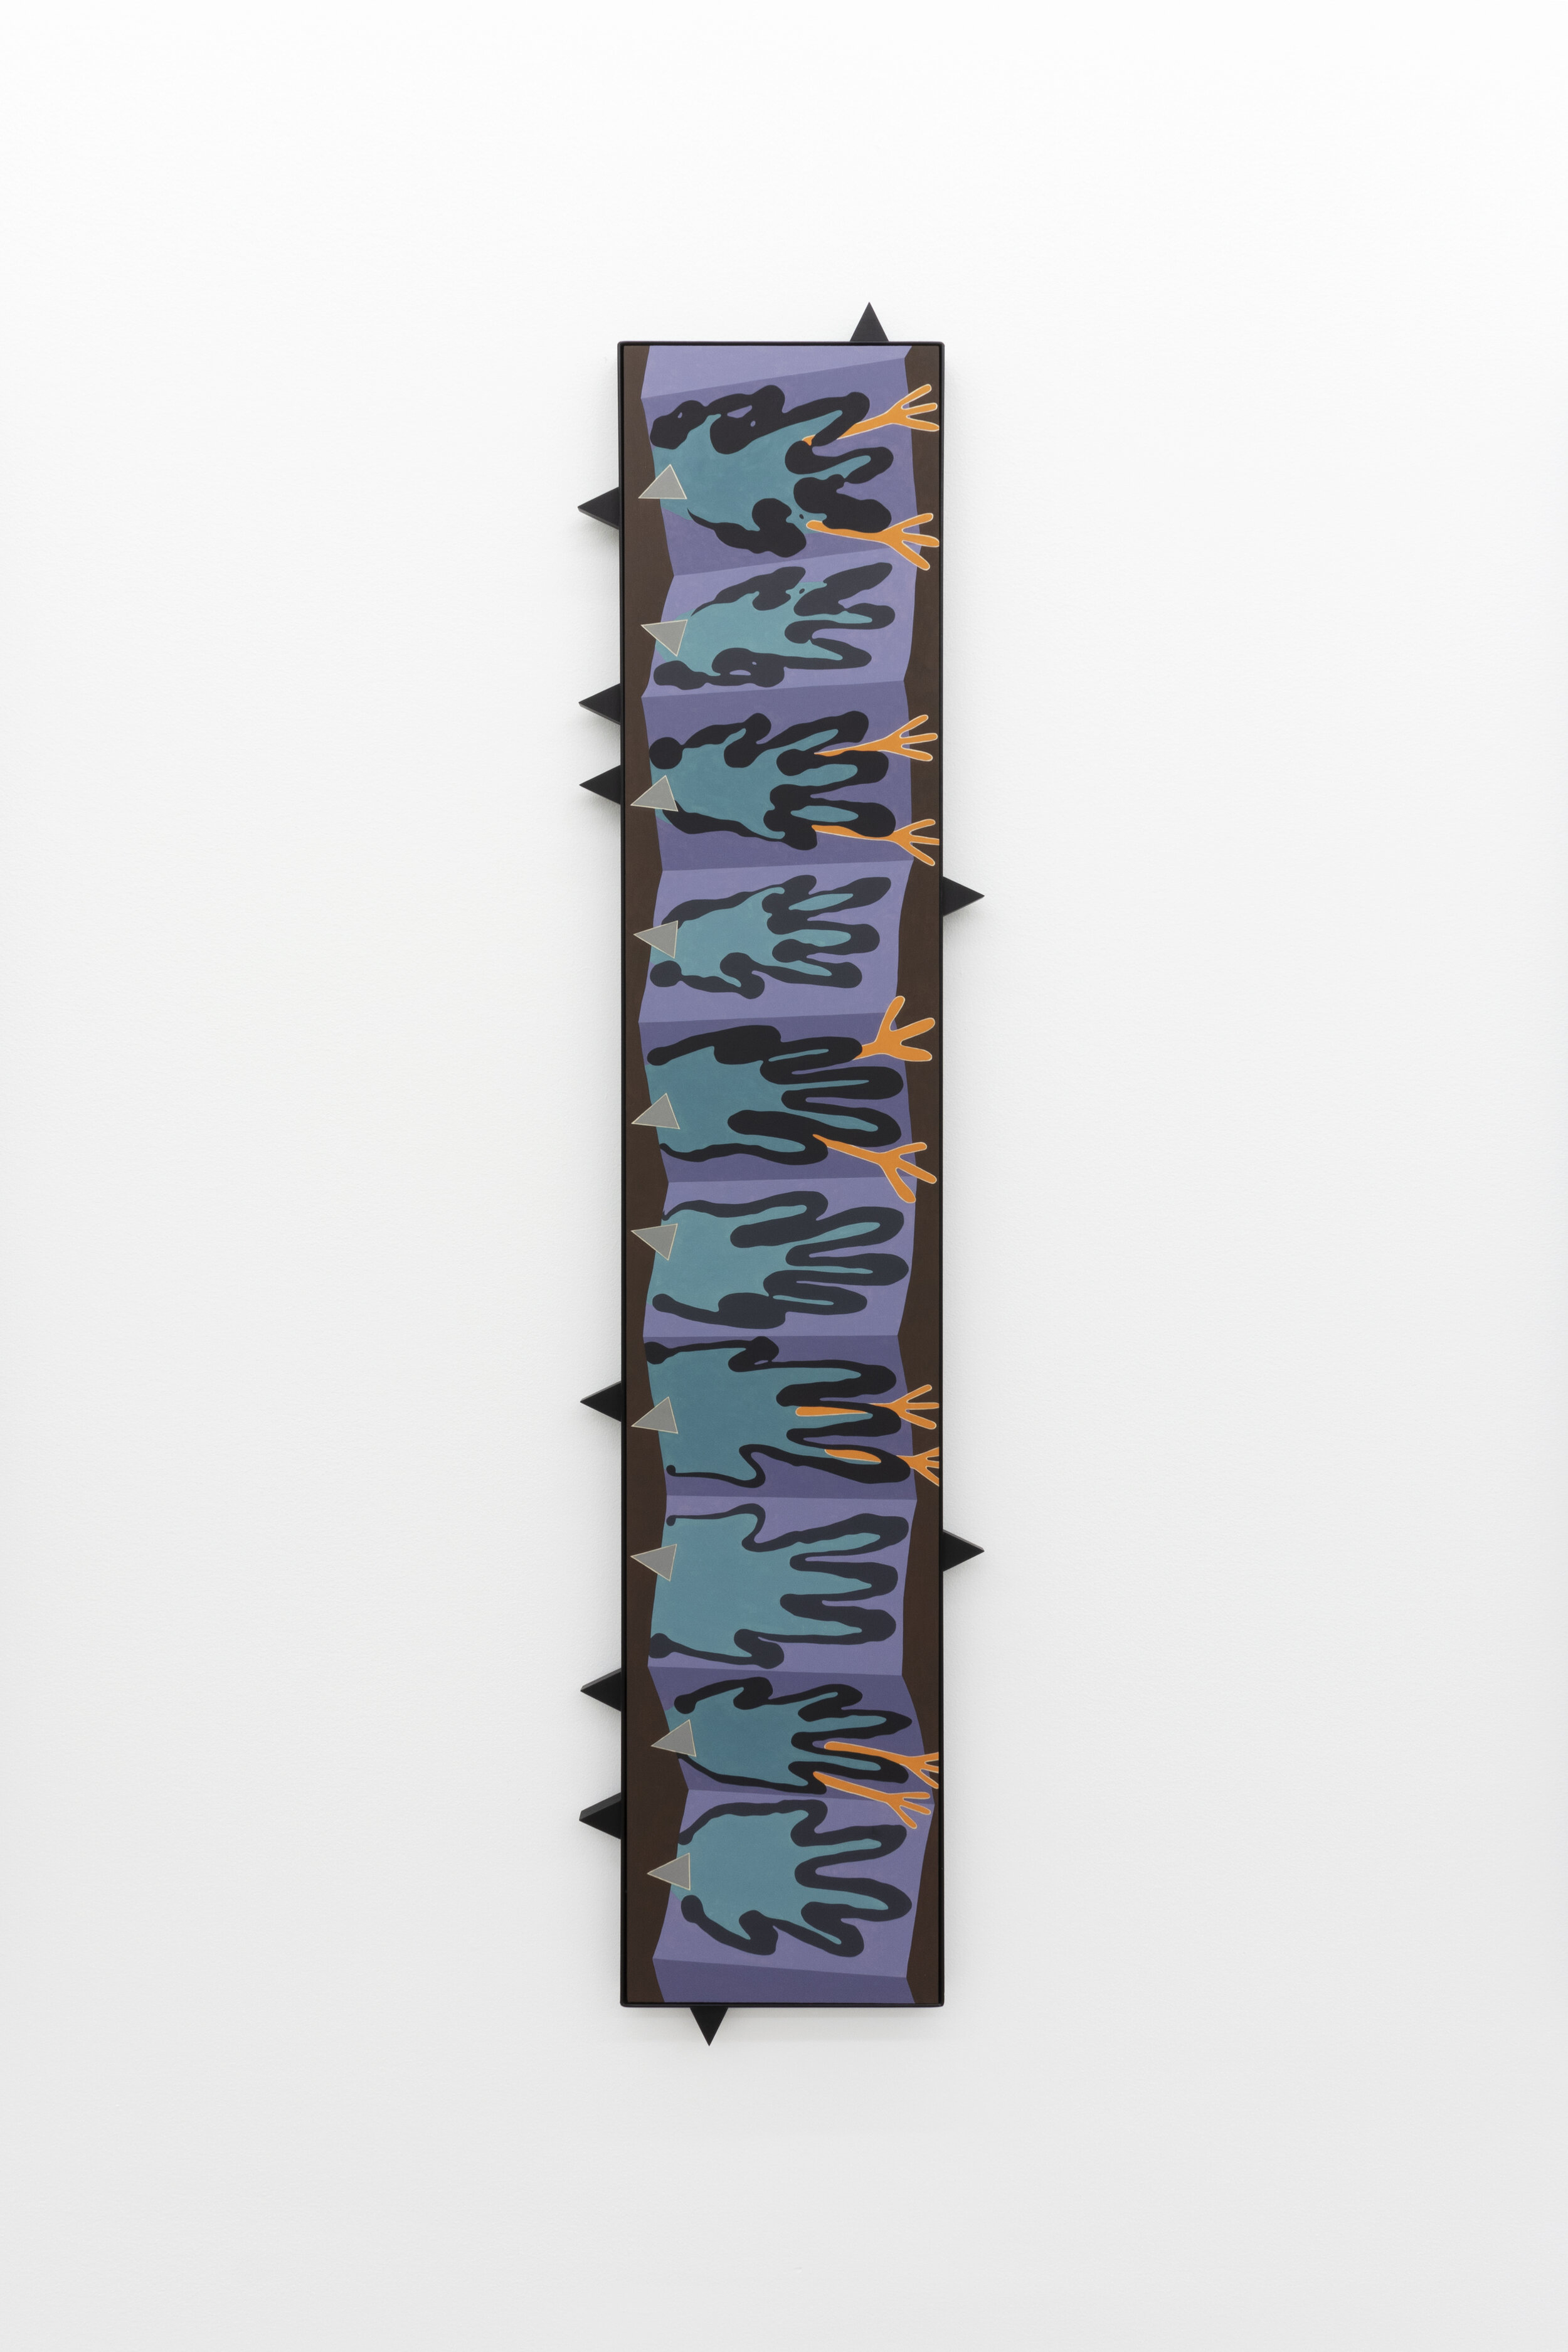  Vanessa Maltese    Hypothesizing coincidence no. 4 , 2020   Oil on panel, powder coated steel, wood, magnets   60.25 x 11.25 in  